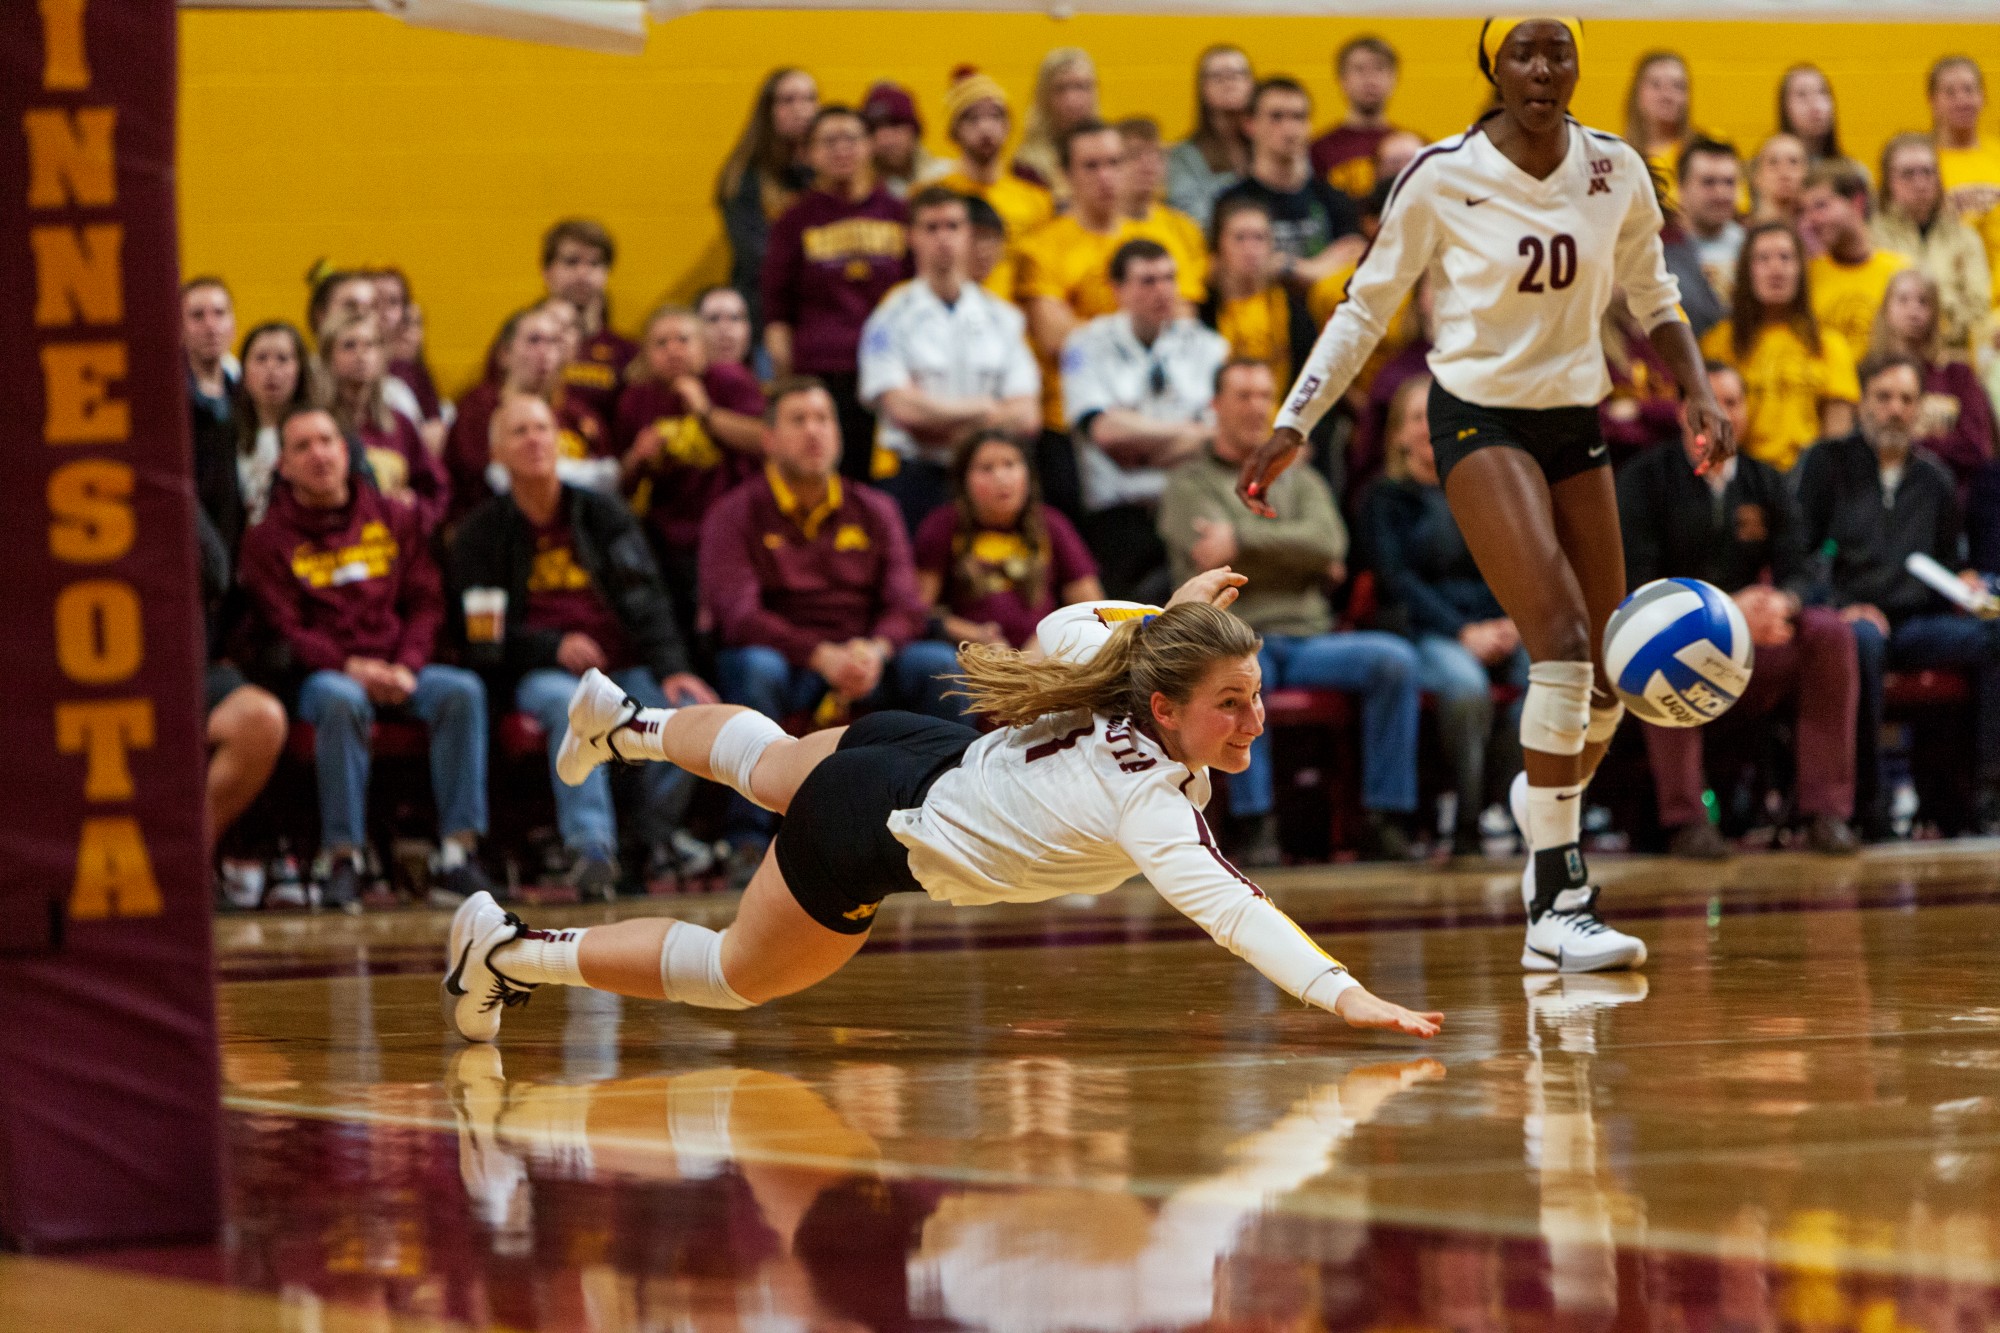 Setter Tamara Dolonga dives for the ball at the Maturi Pavilion on Thursday, Nov. 14. The Gophers ended the night with a 3-1 loss against the Badgers. 